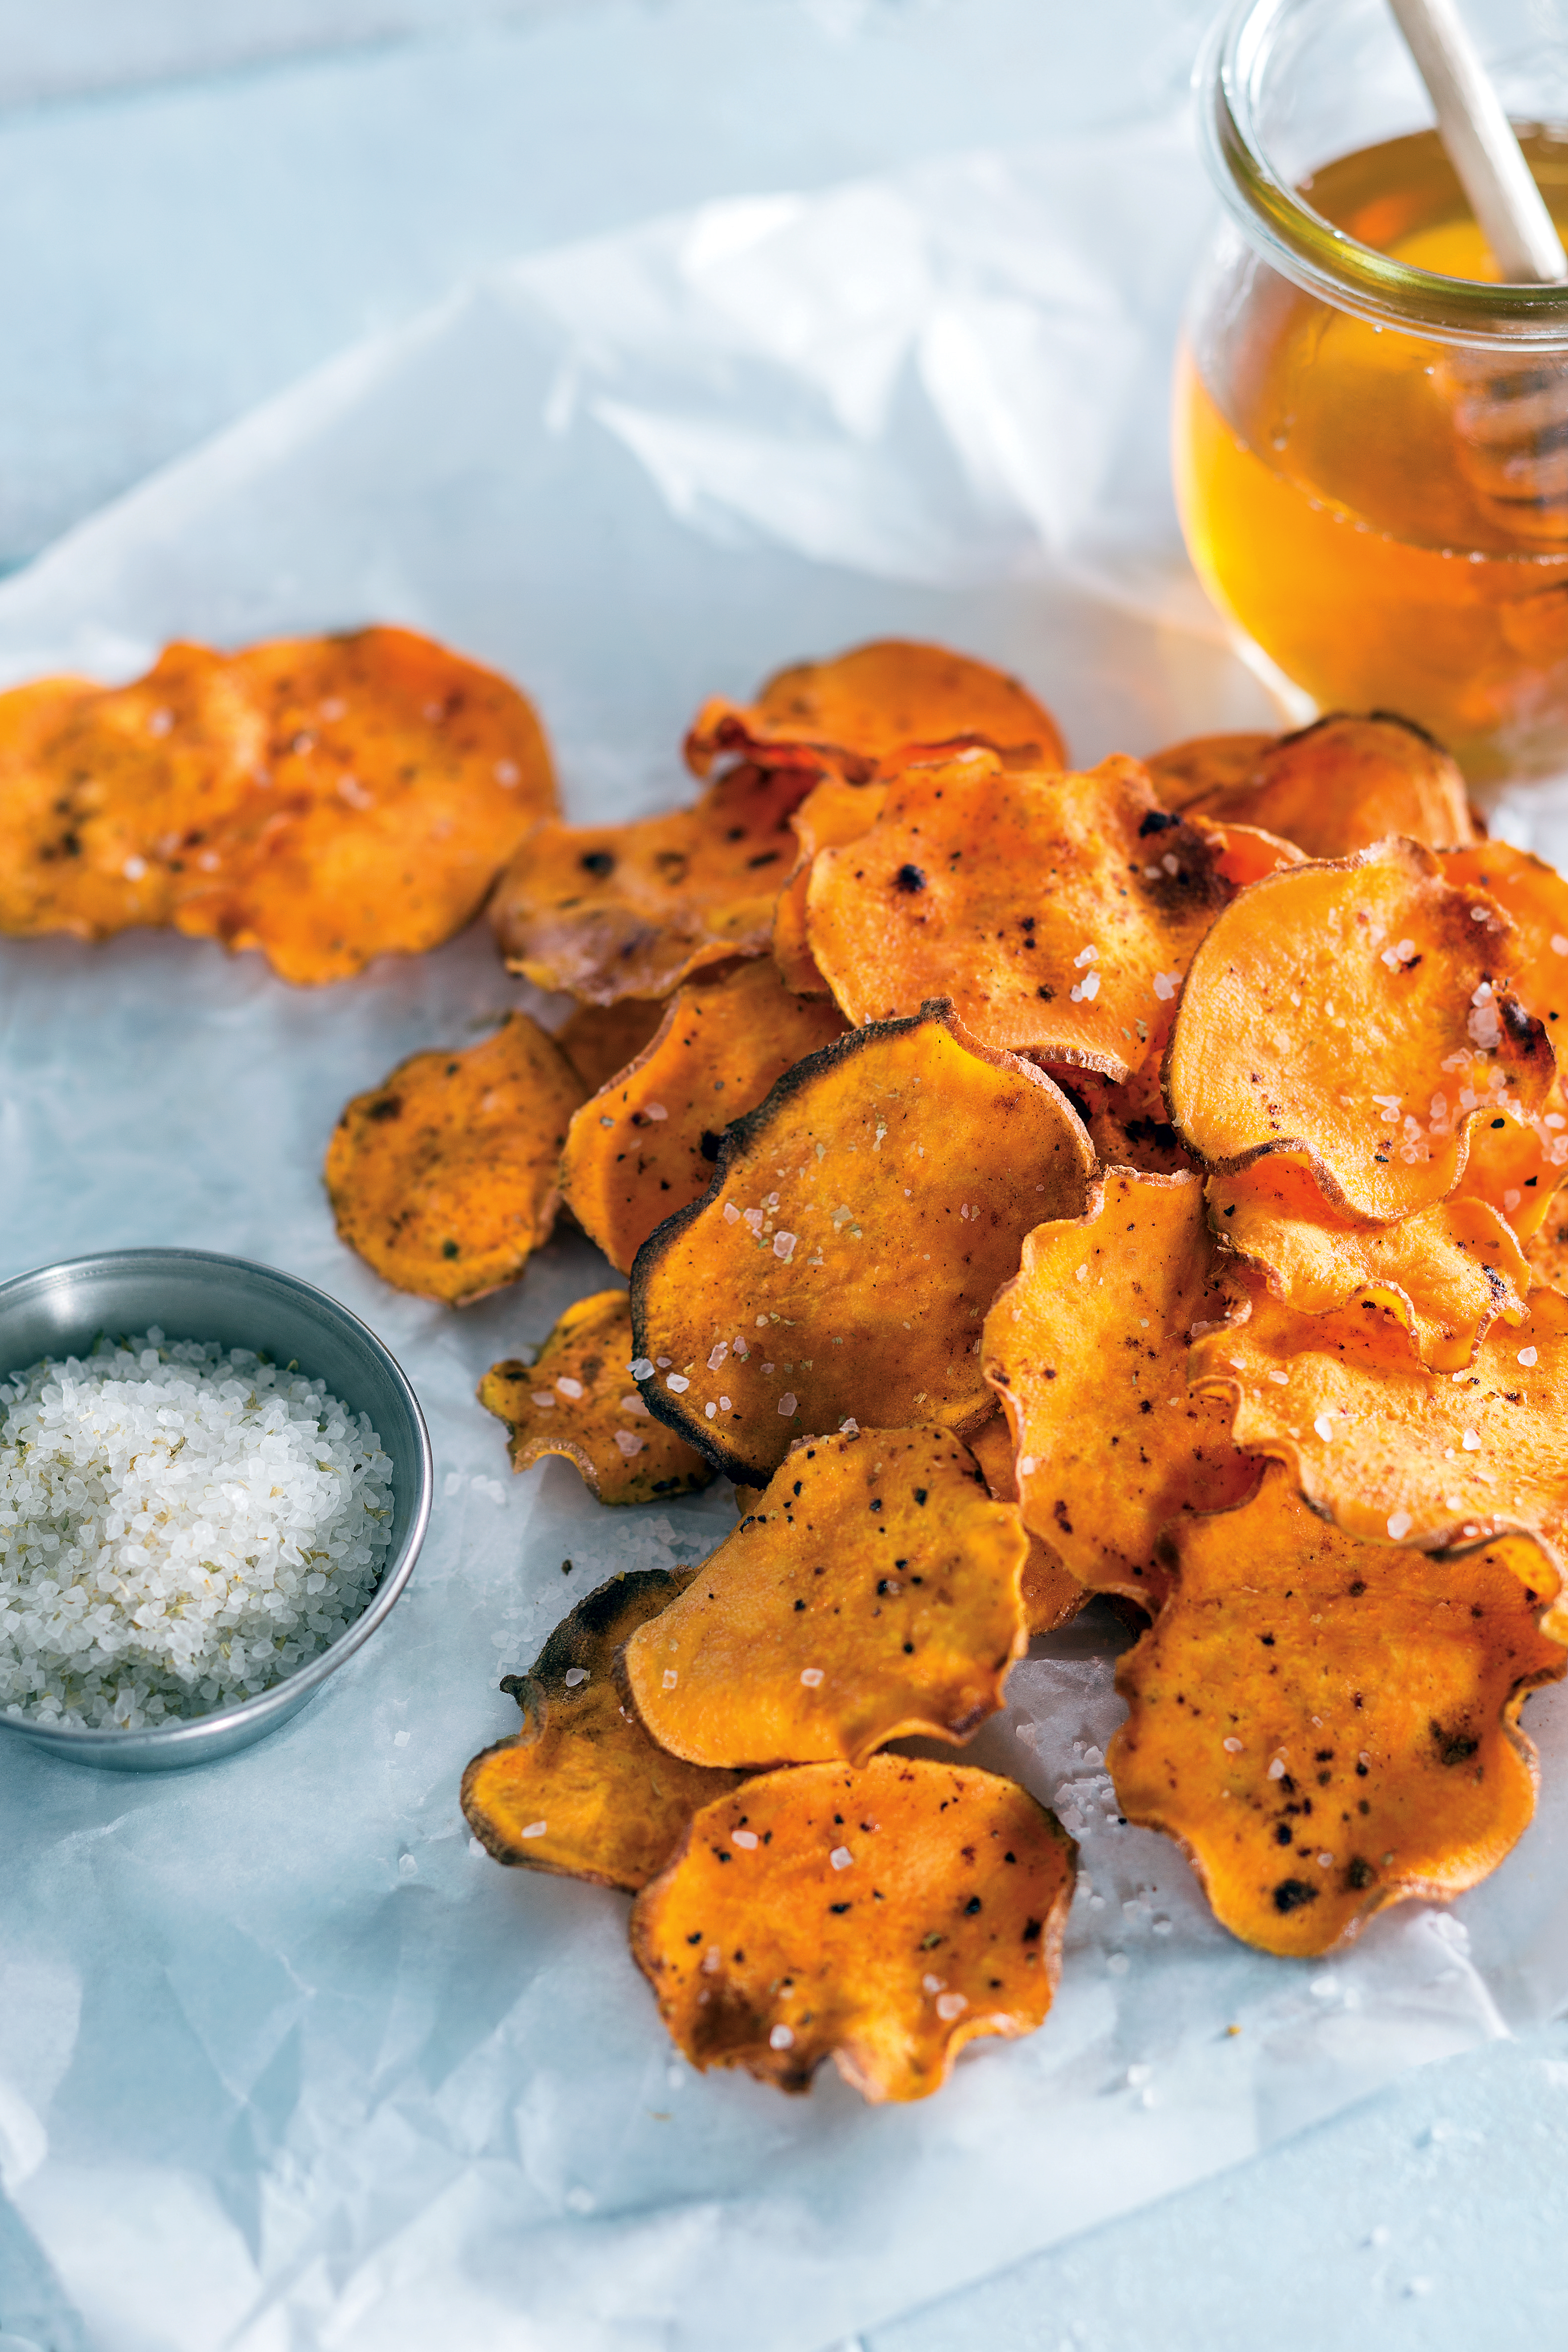 Ever think about making your own potato chips? It's easier than you think. These Honey-Glazed Sweet Potato Chips are made with - no surprise - sweet potatoes, enhanced with the flavors of honey and ground cinnamon.